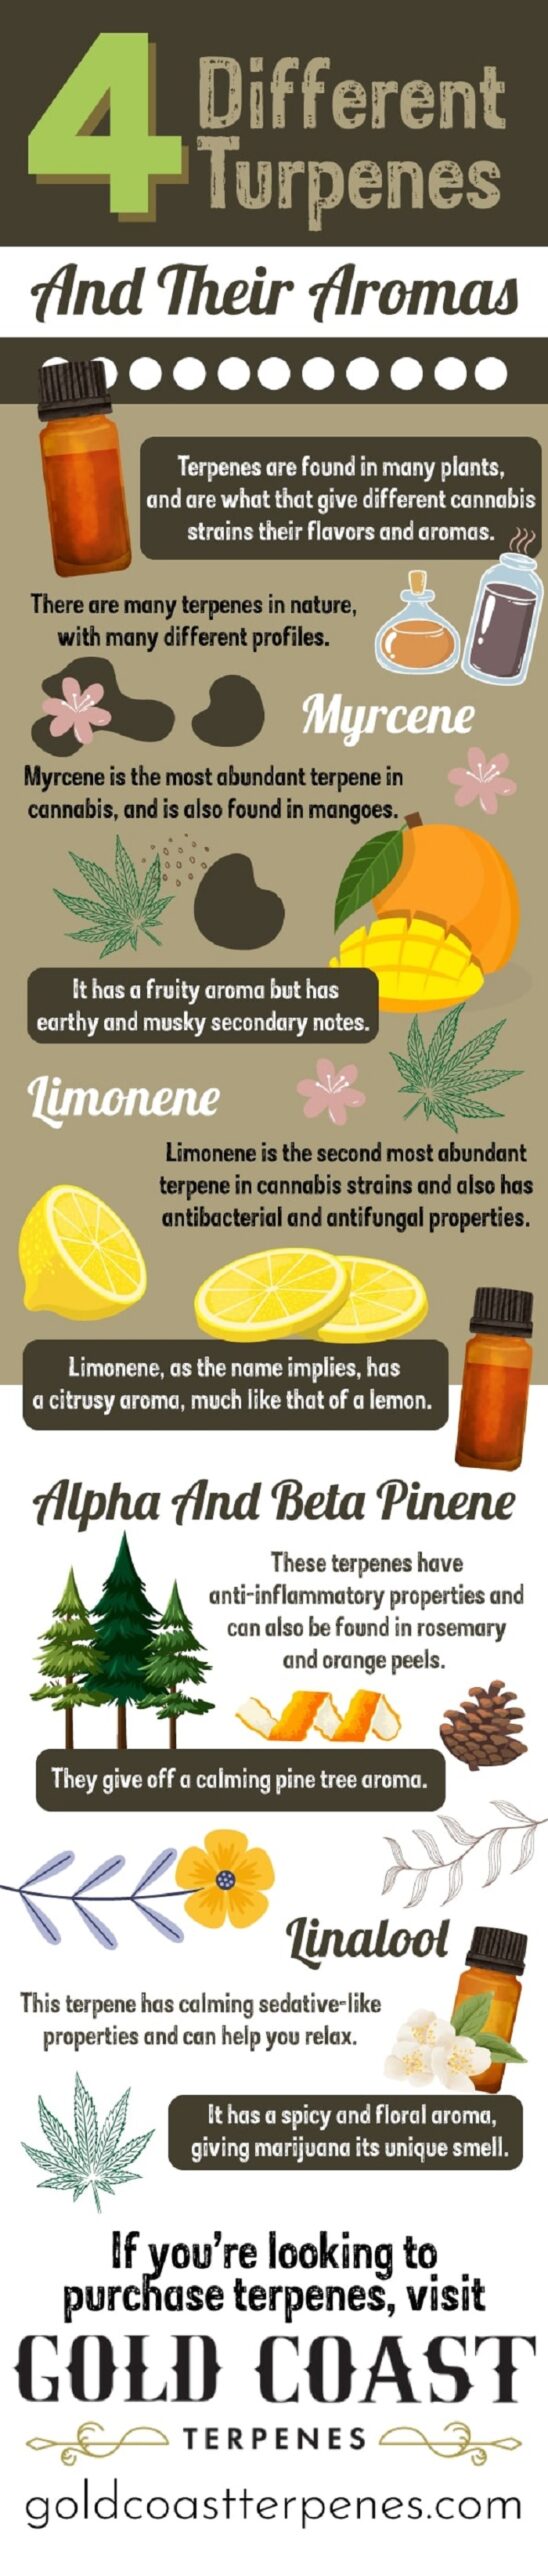 4 Different Terpenes and Their Aromas